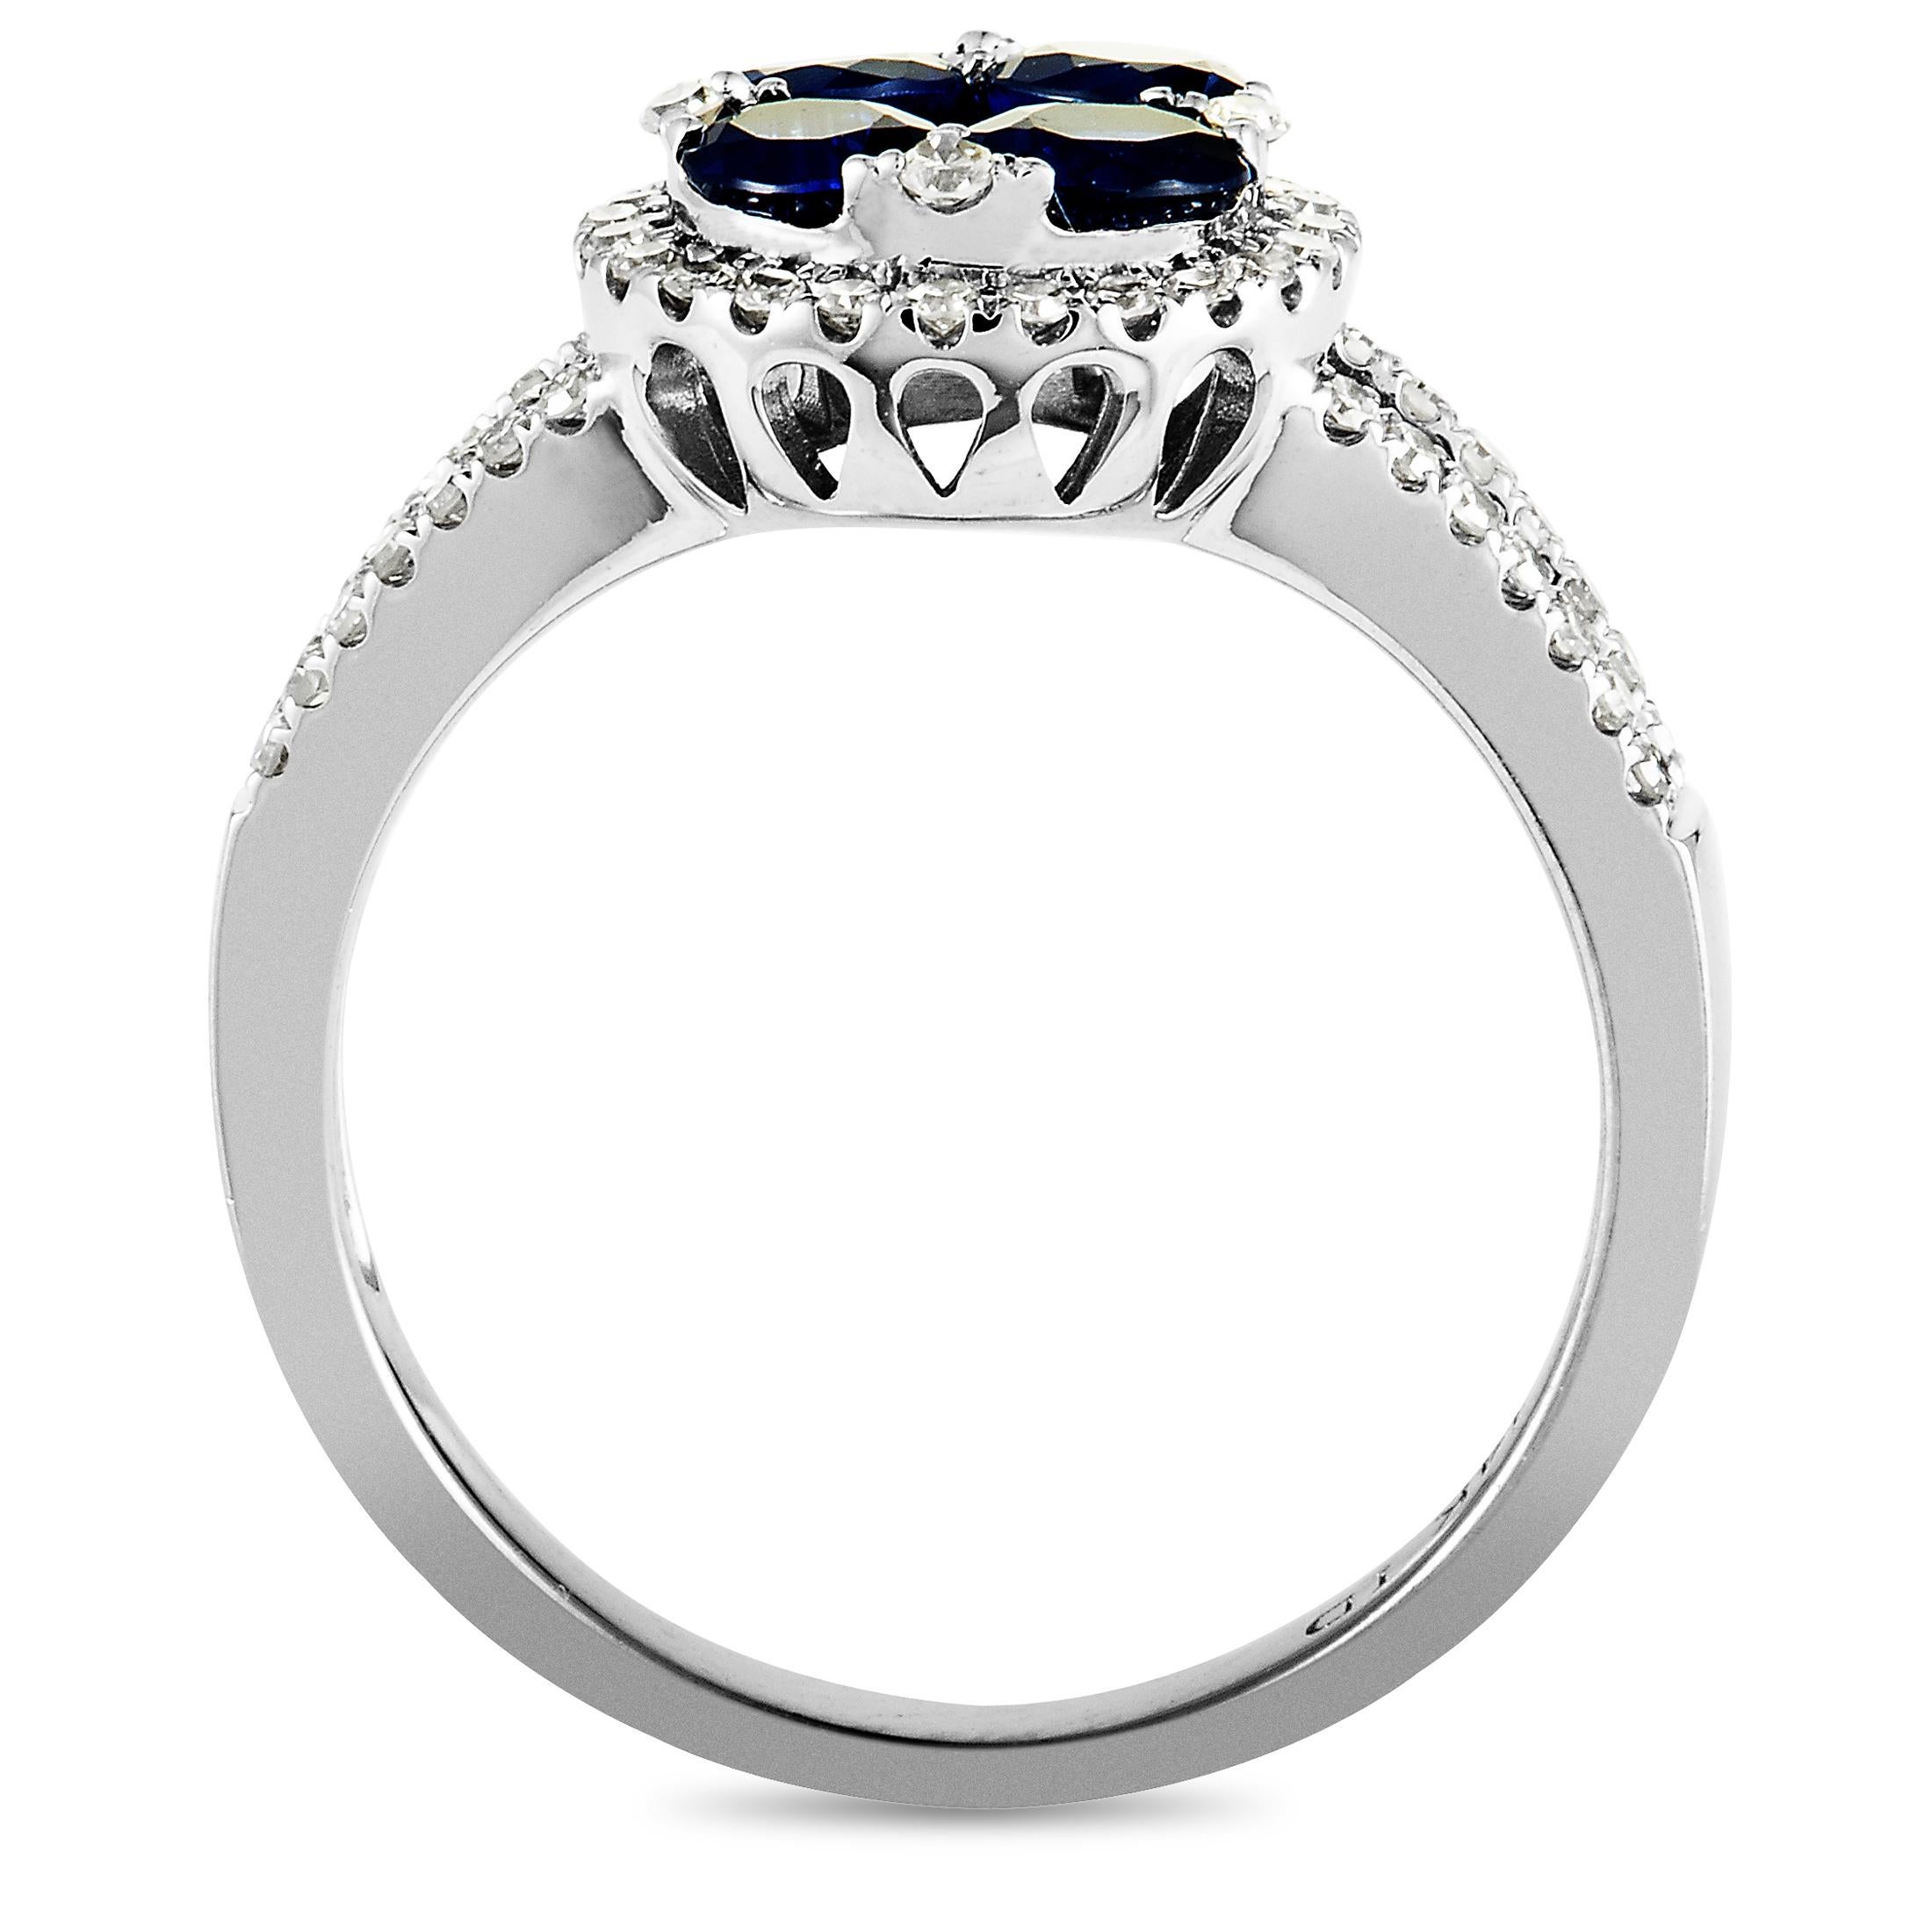 This ring is made of 14K white gold and weighs 3.9 grams. It is set with sapphires and with a total of 0.33 carats of diamonds. The ring boasts band thickness of 3 mm and top height of 5 mm, while top dimensions measure 19 by 11 mm.
 
 Offered in